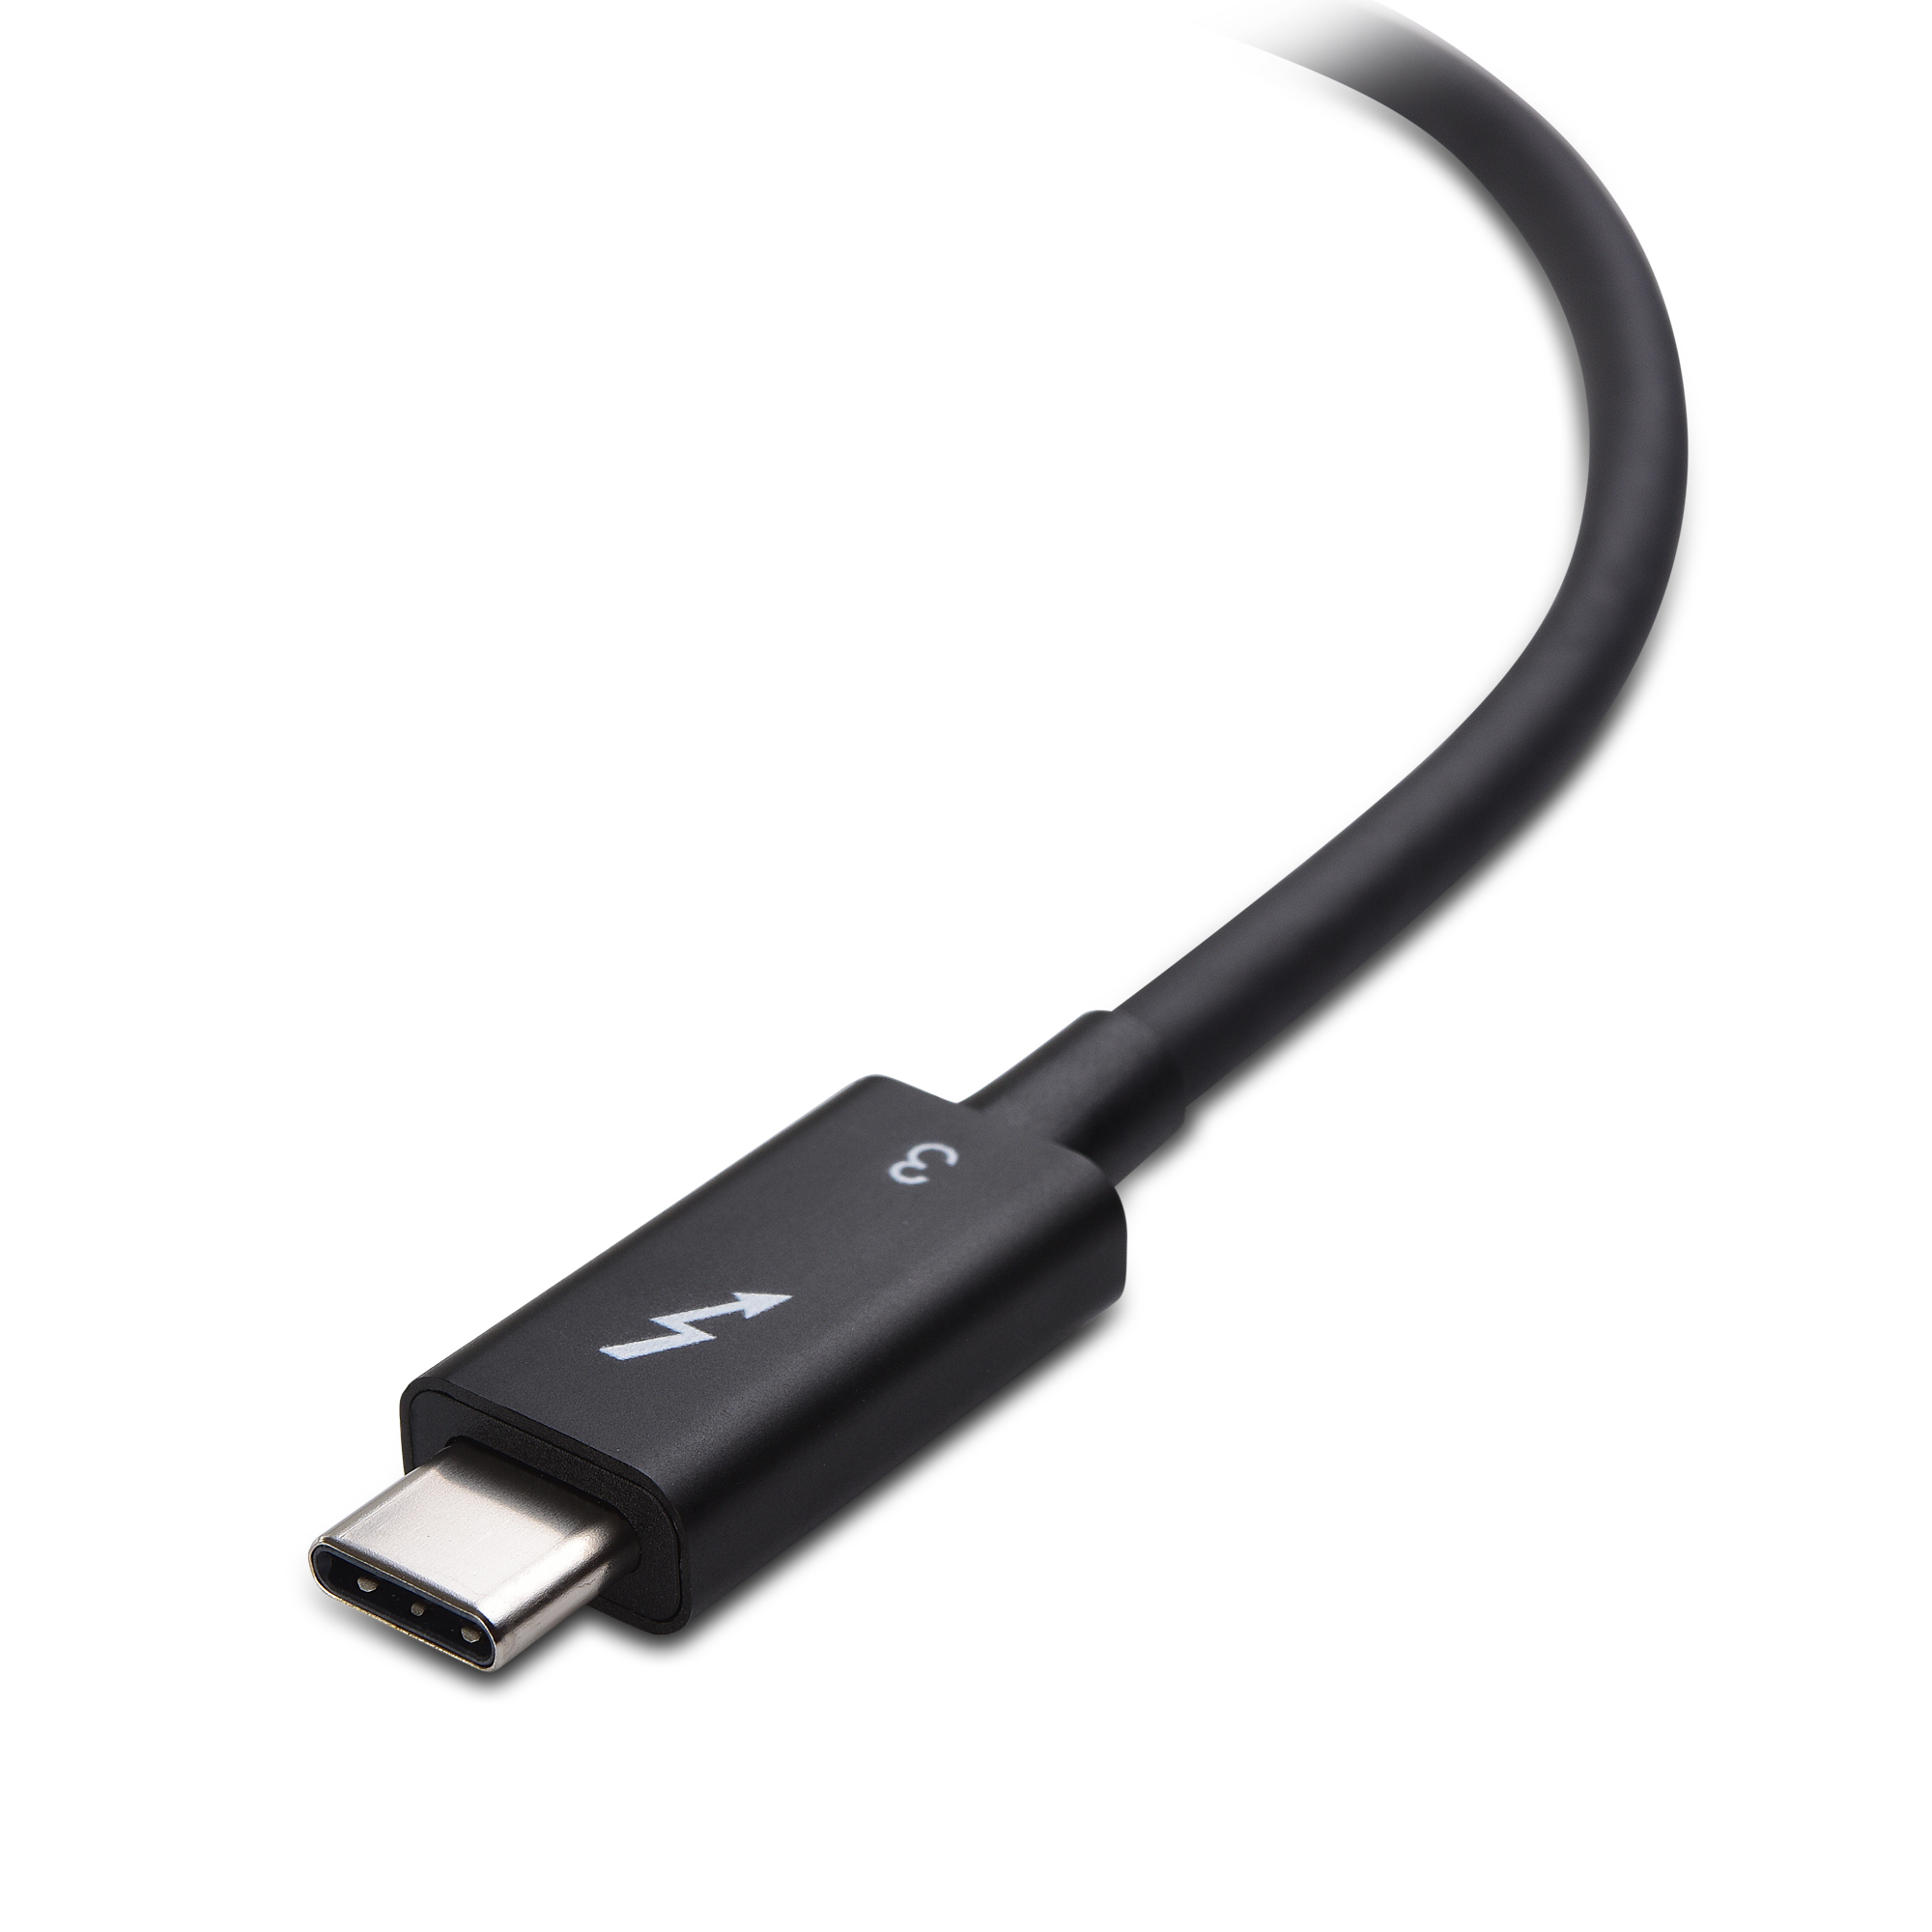 cable thunderbolt to hdmi